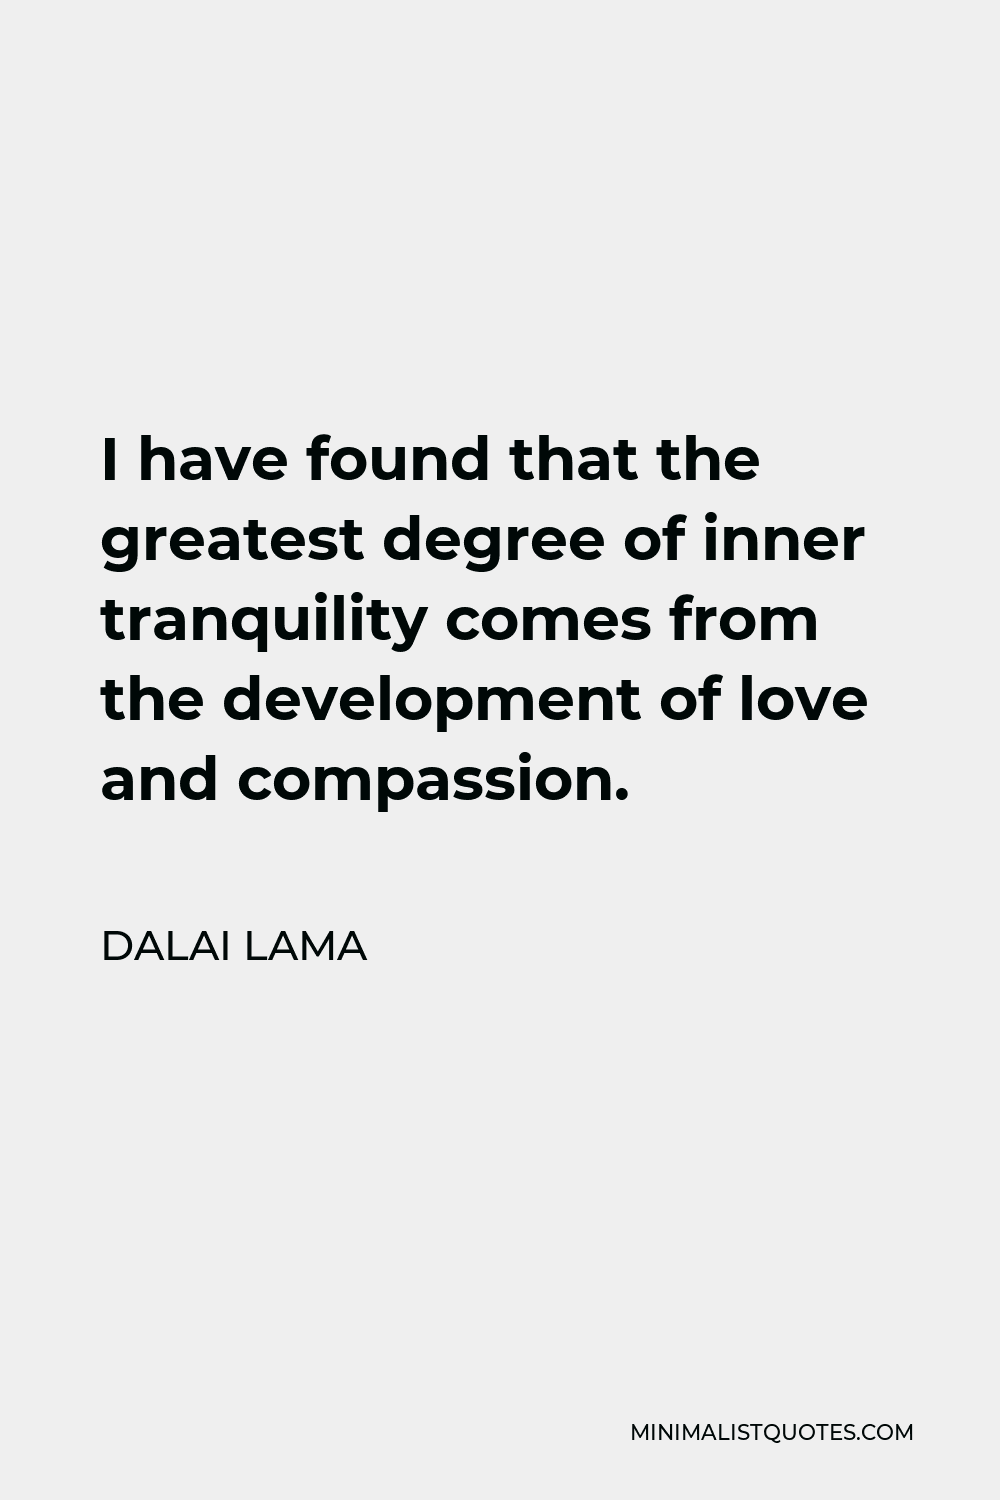 Dalai Lama Quote - I have found that the greatest degree of inner tranquility comes from the development of love and compassion.